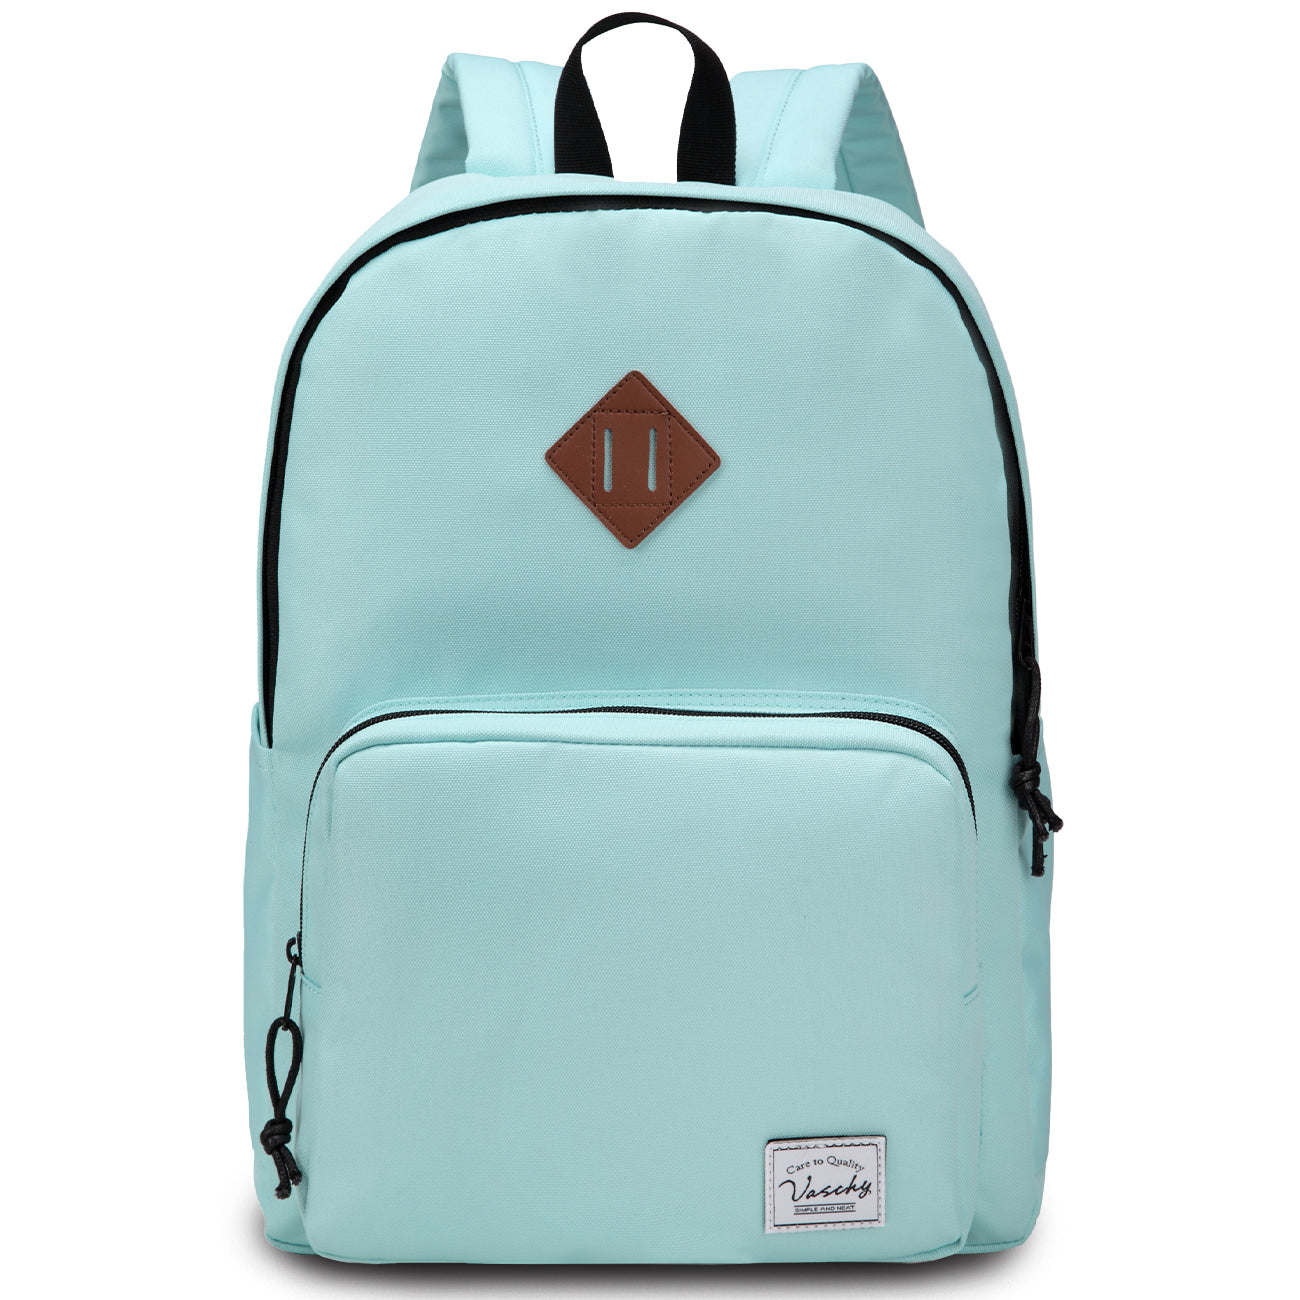 Teens Backpack For Any Occasion